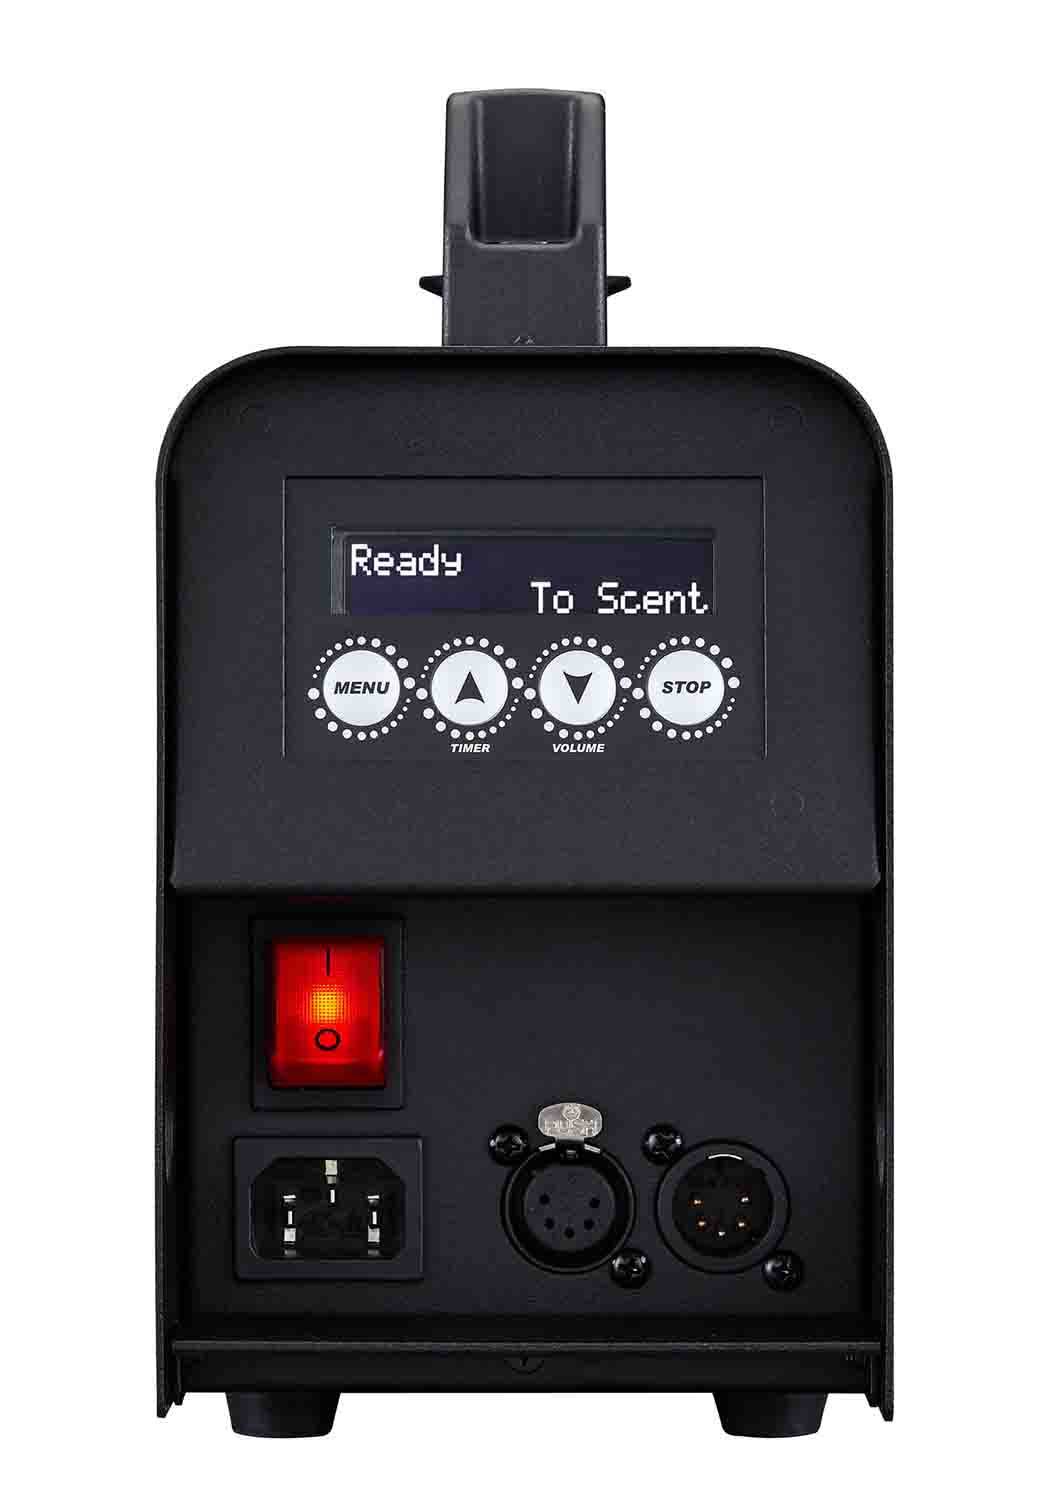 Antari SCN-600 Scent Machine with Built in DMX and Timer - Hollywood DJ